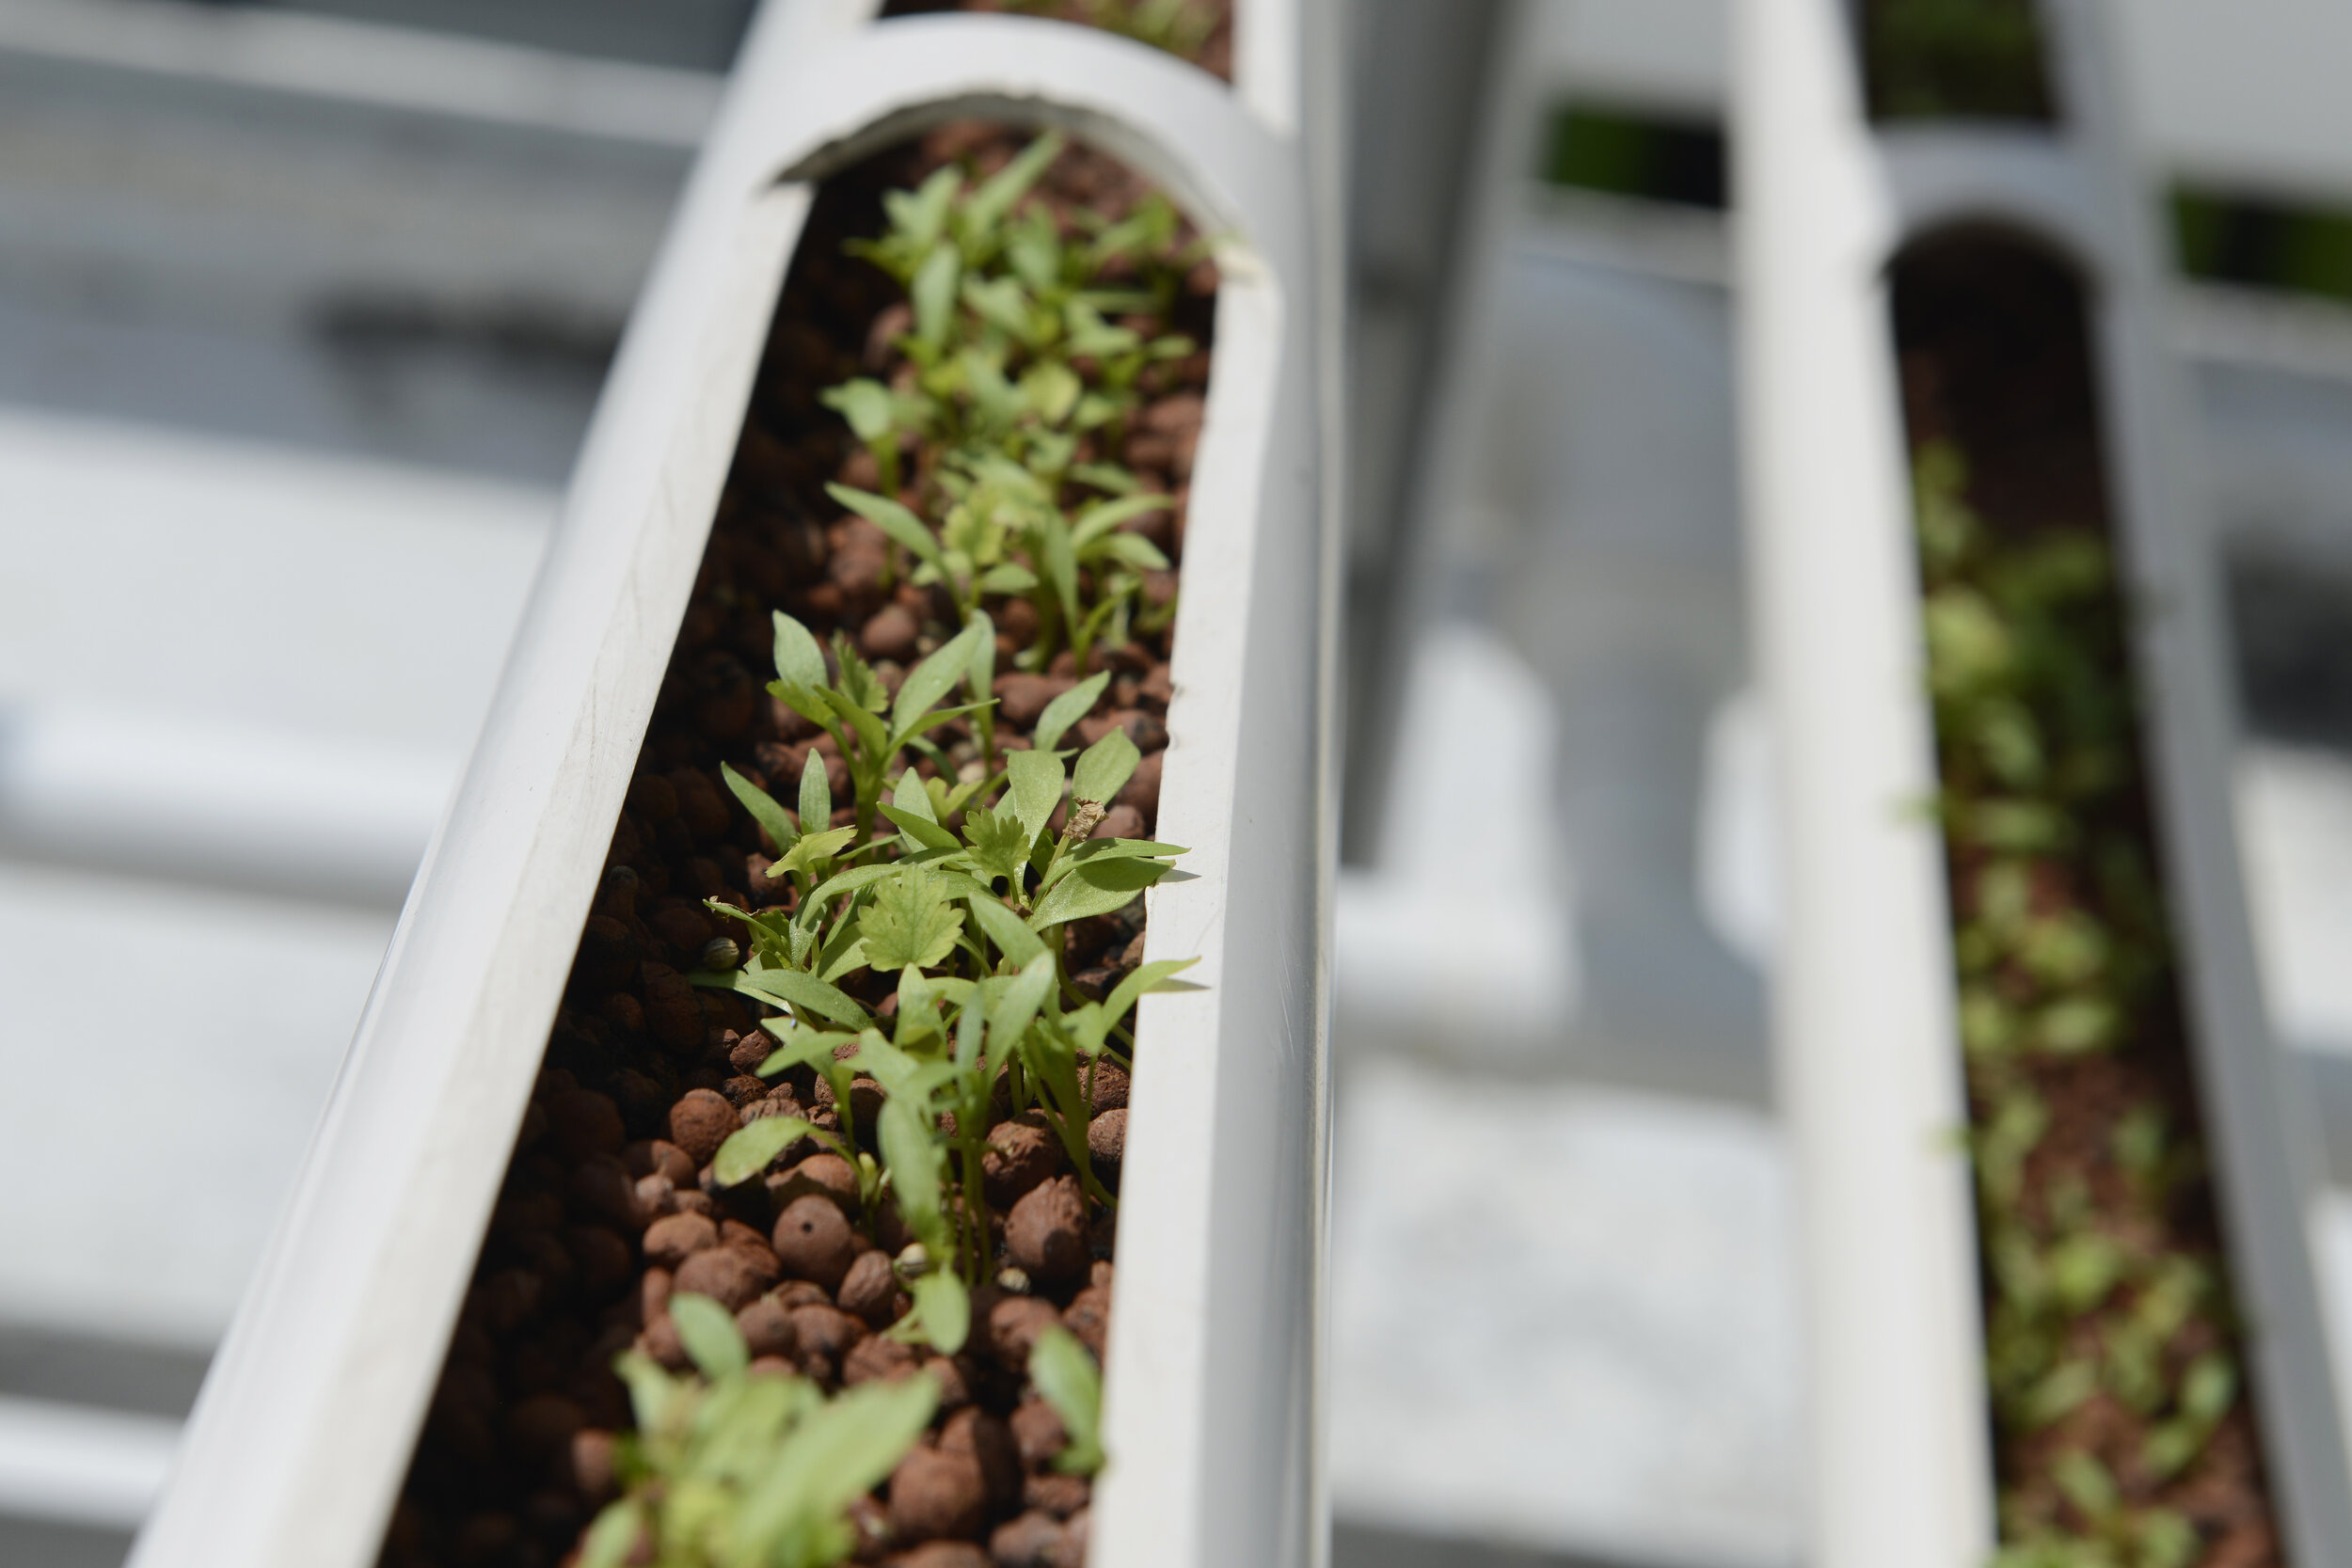  Organic cilantro seedlings sprout from growing towers that are primarily made out of polyvinyl chloride (PVC) pipes at Citiponics' urban farm on the rooftop of a multi-storey carpark in a public housing estate in western Singapore 